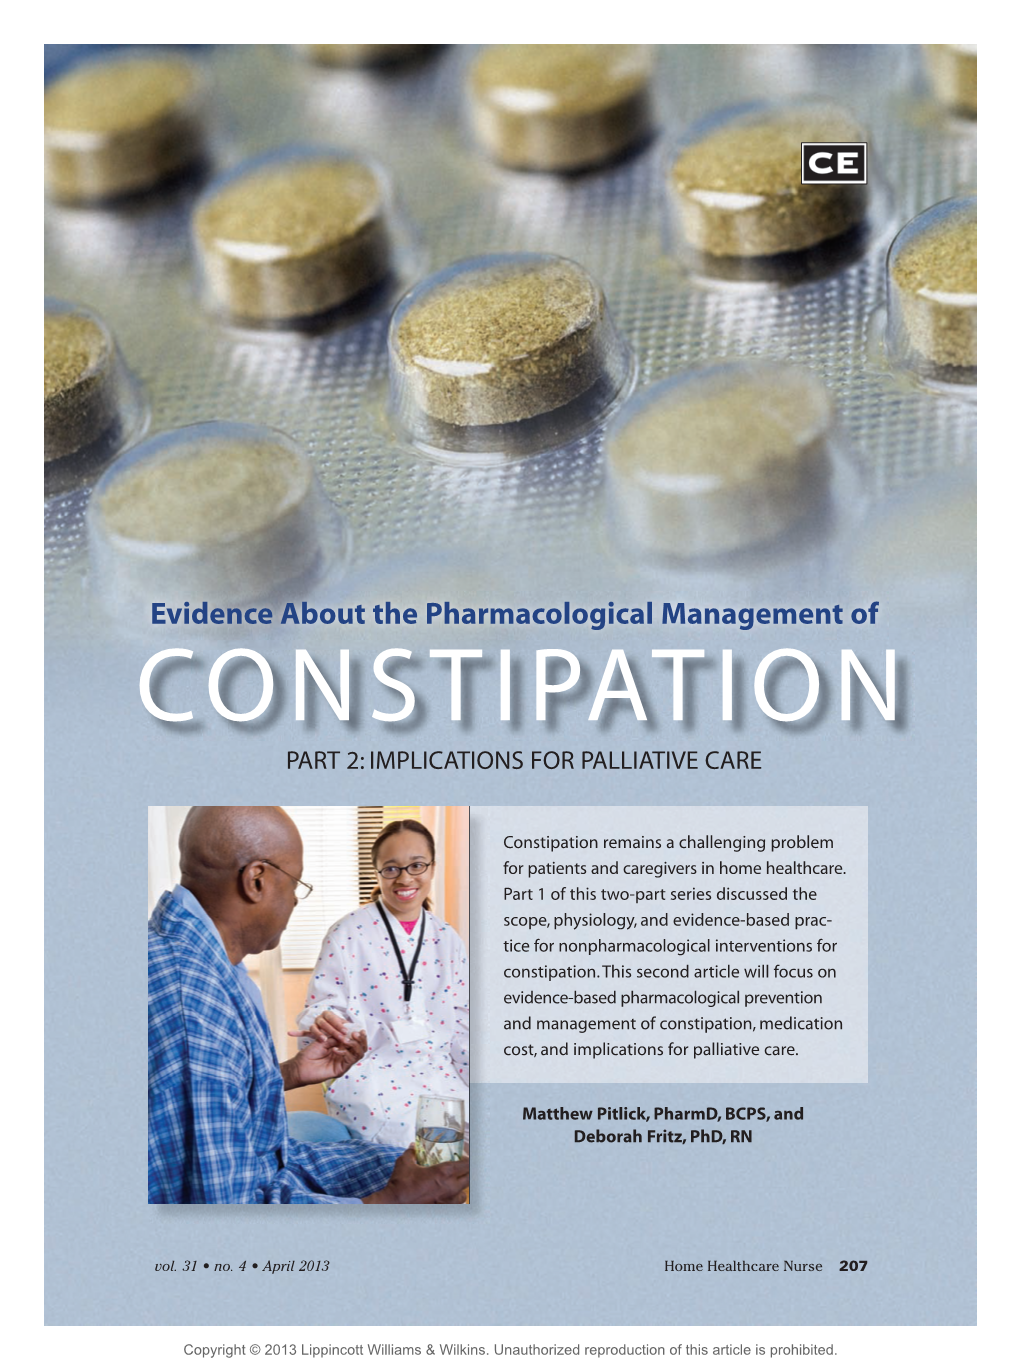 Constipation Part 2: Implications for Palliative Care